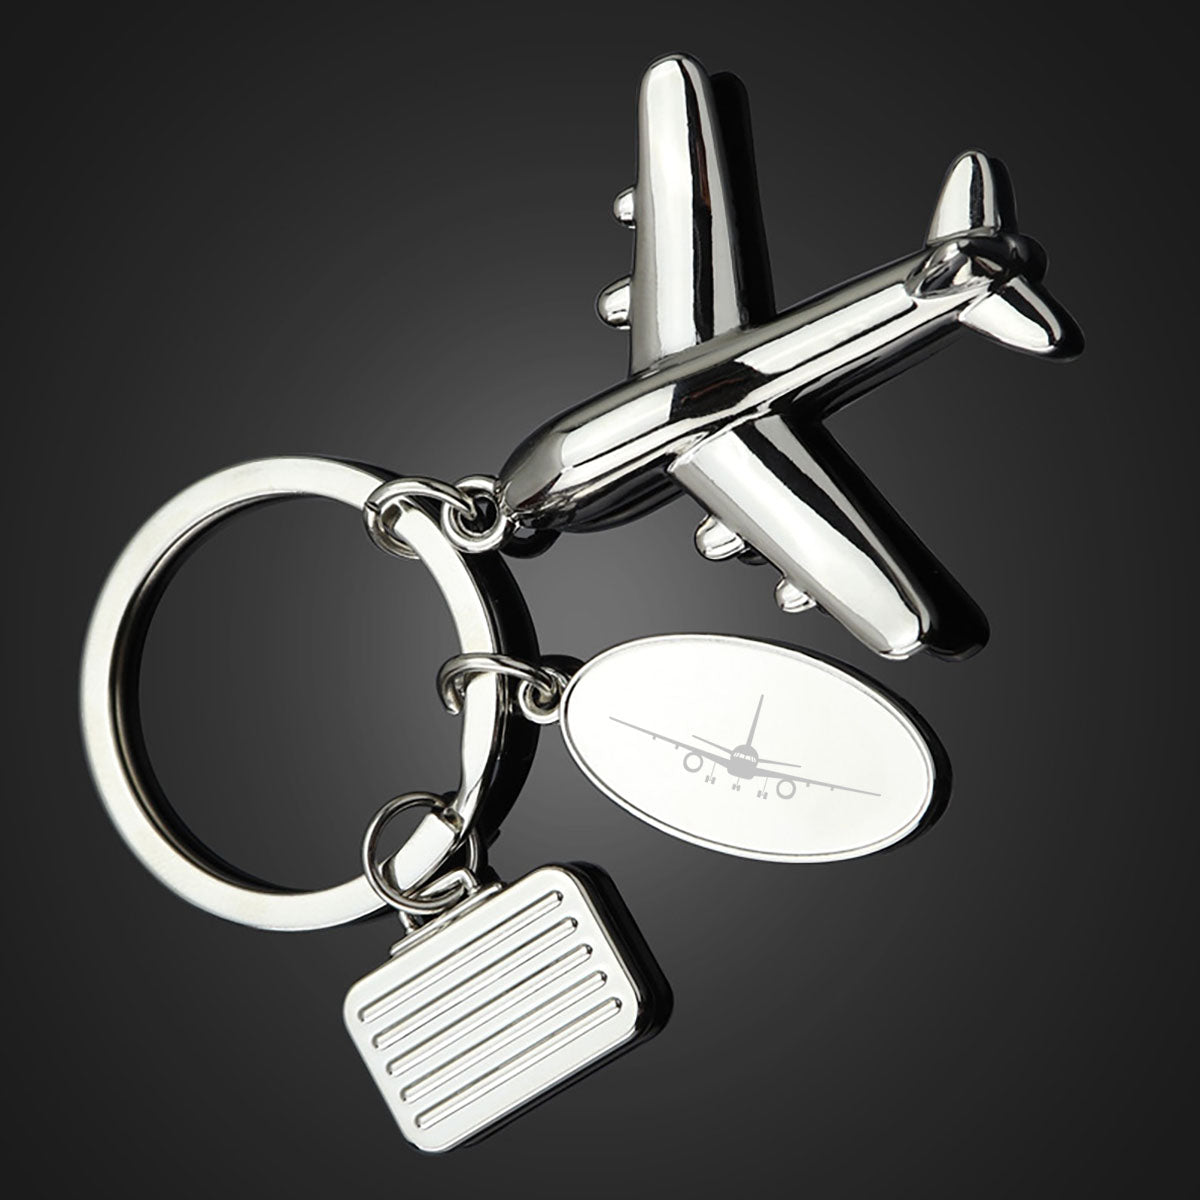 Boeing 757 Silhouette Designed Suitcase Airplane Key Chains